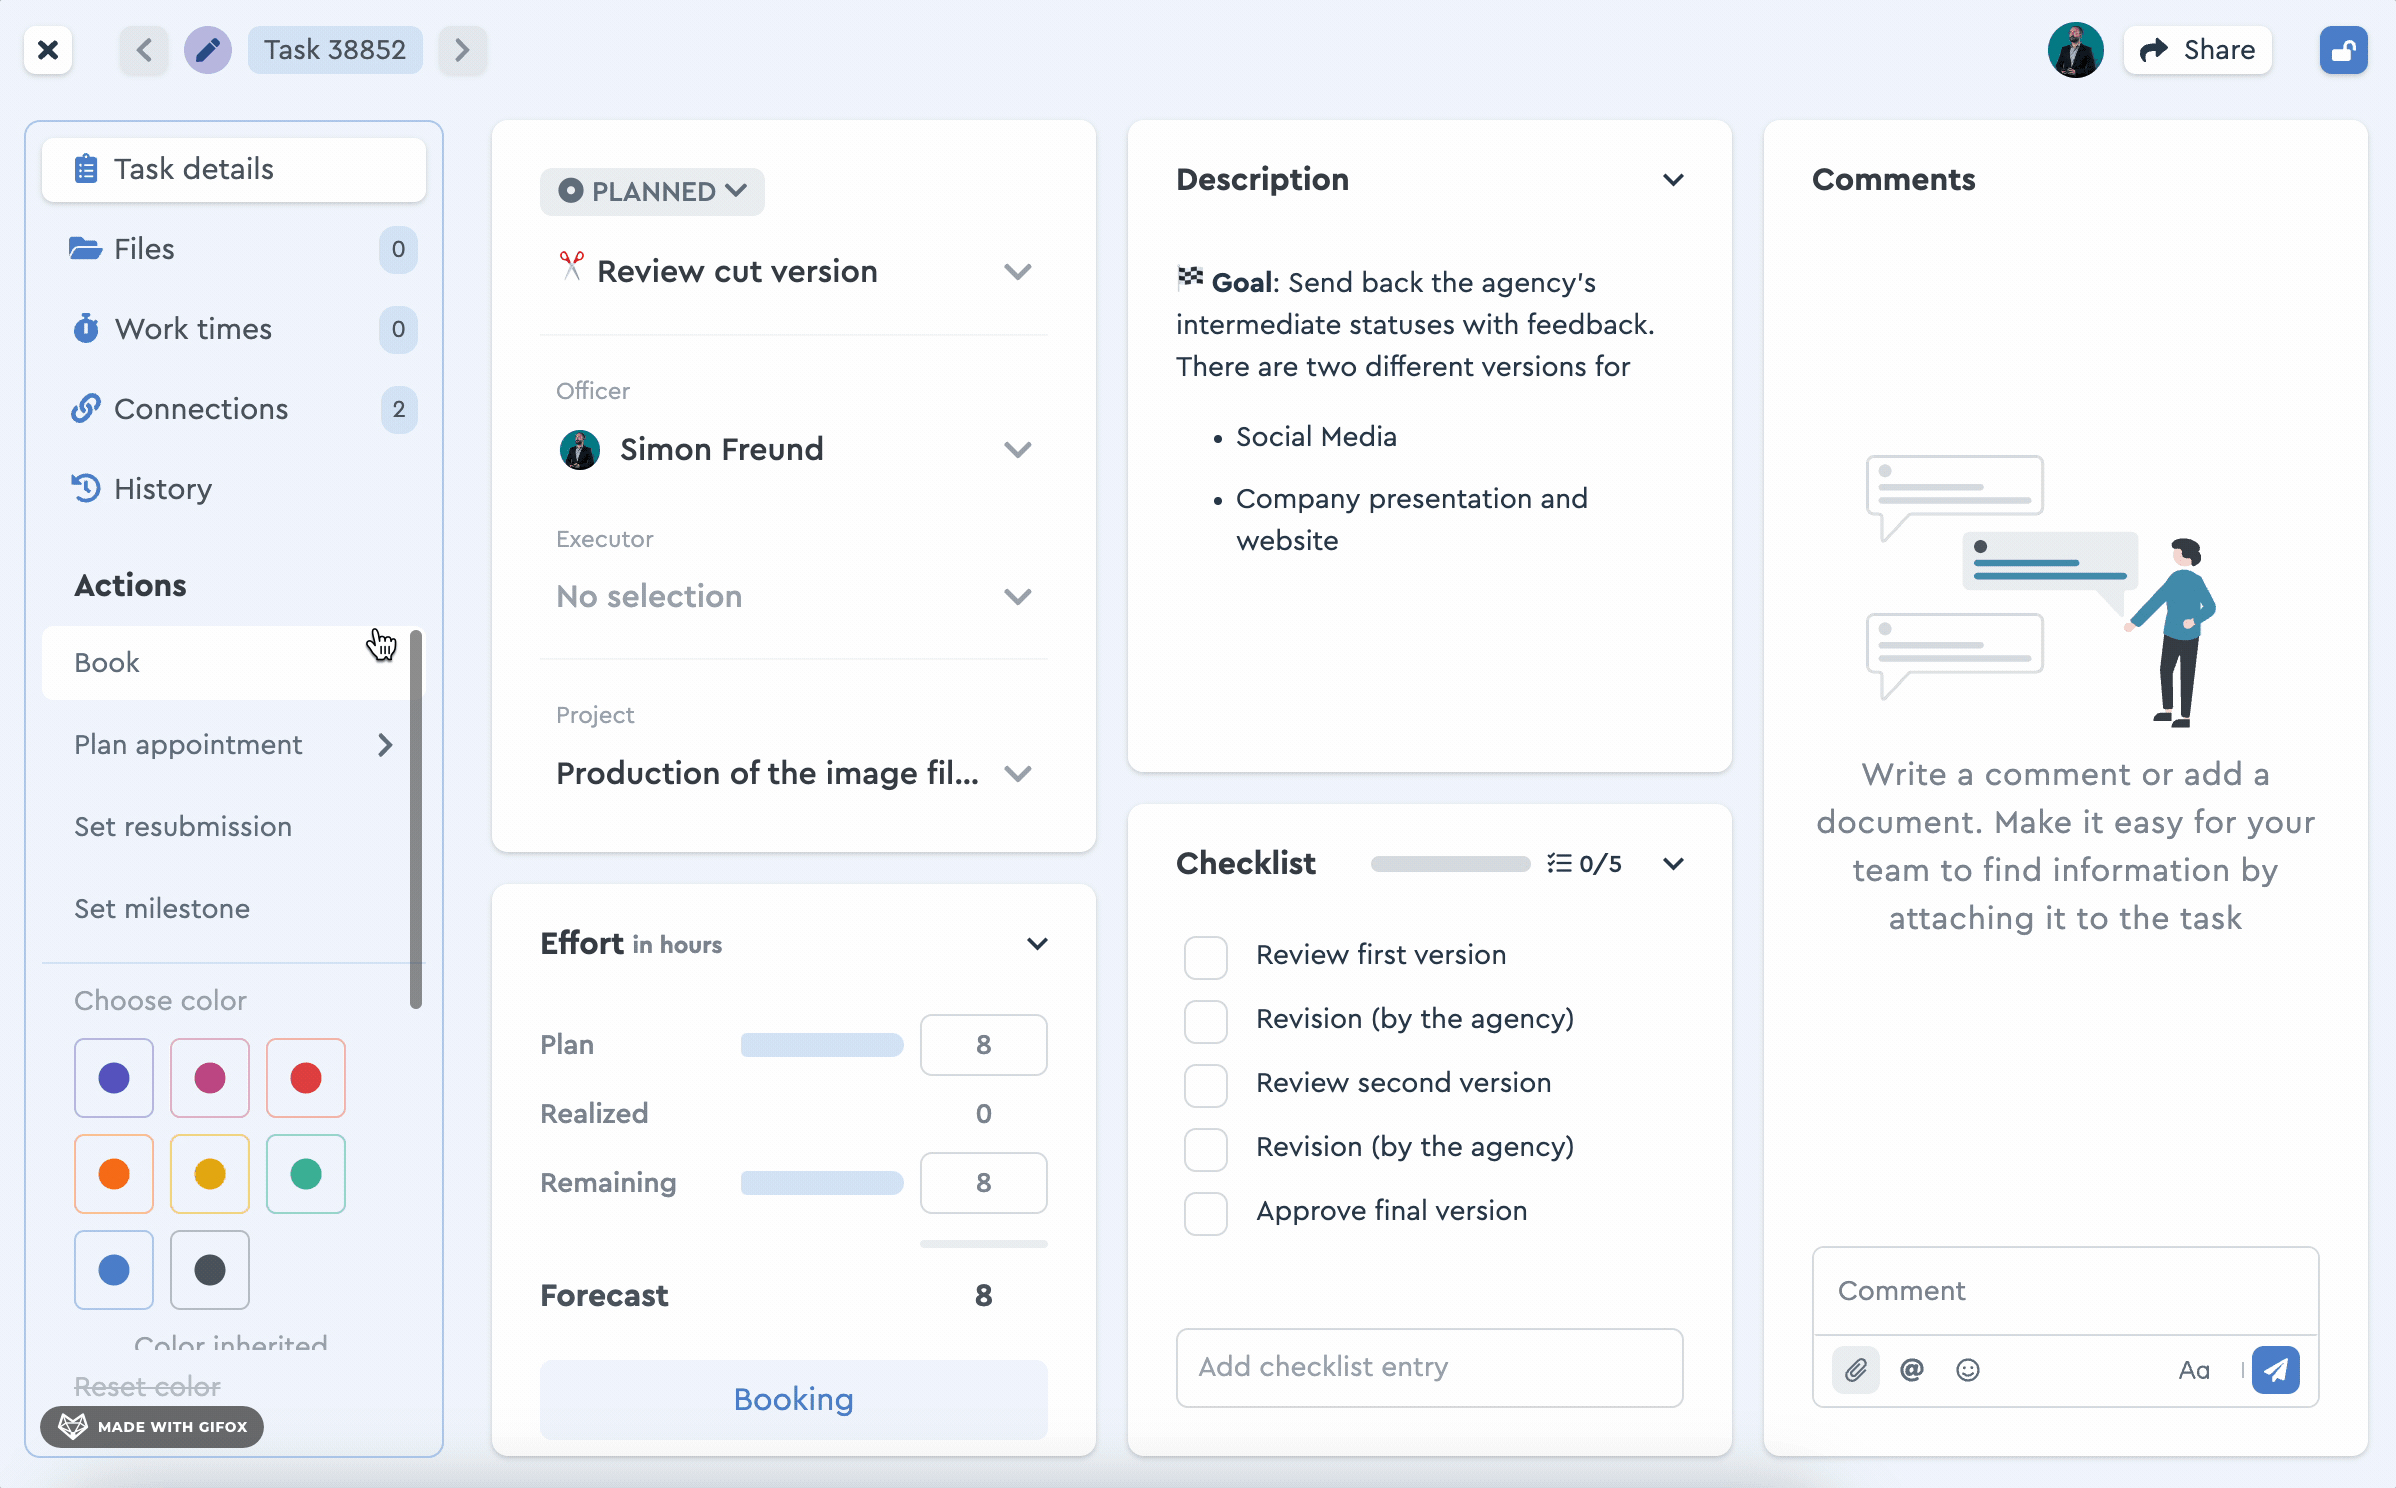 You can duplicate tasks with just one click